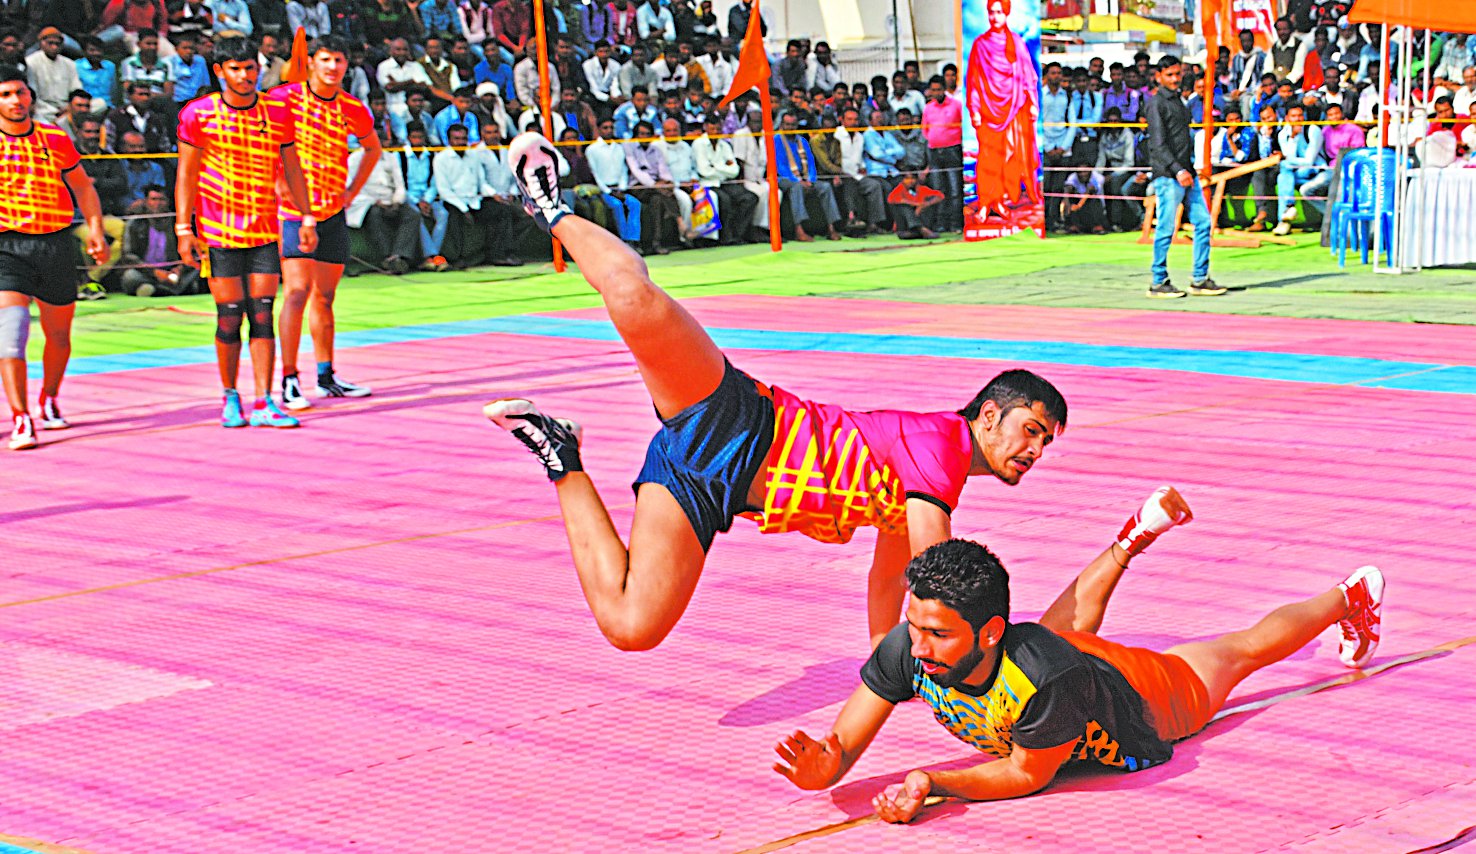 Passion for victory in kabaddi